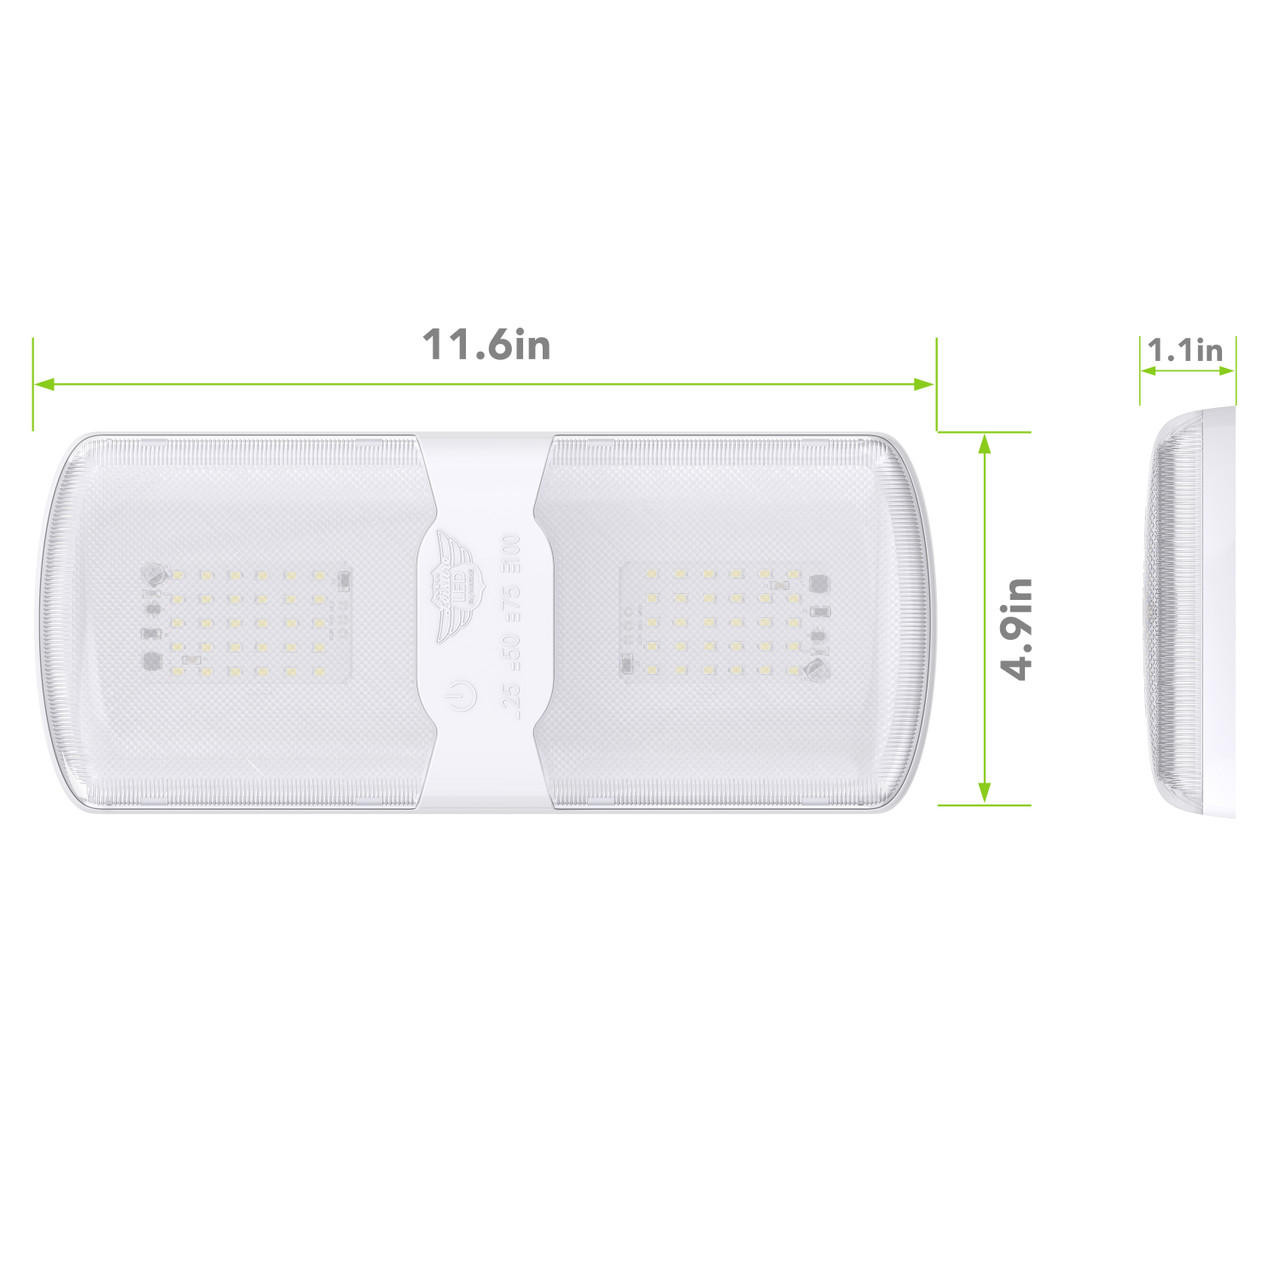  Leisure LED RV LED Ceiling Double Dome Interior Light Fixture Touch to Dim switch Natural White 4000-4500K 60-2835SMD 